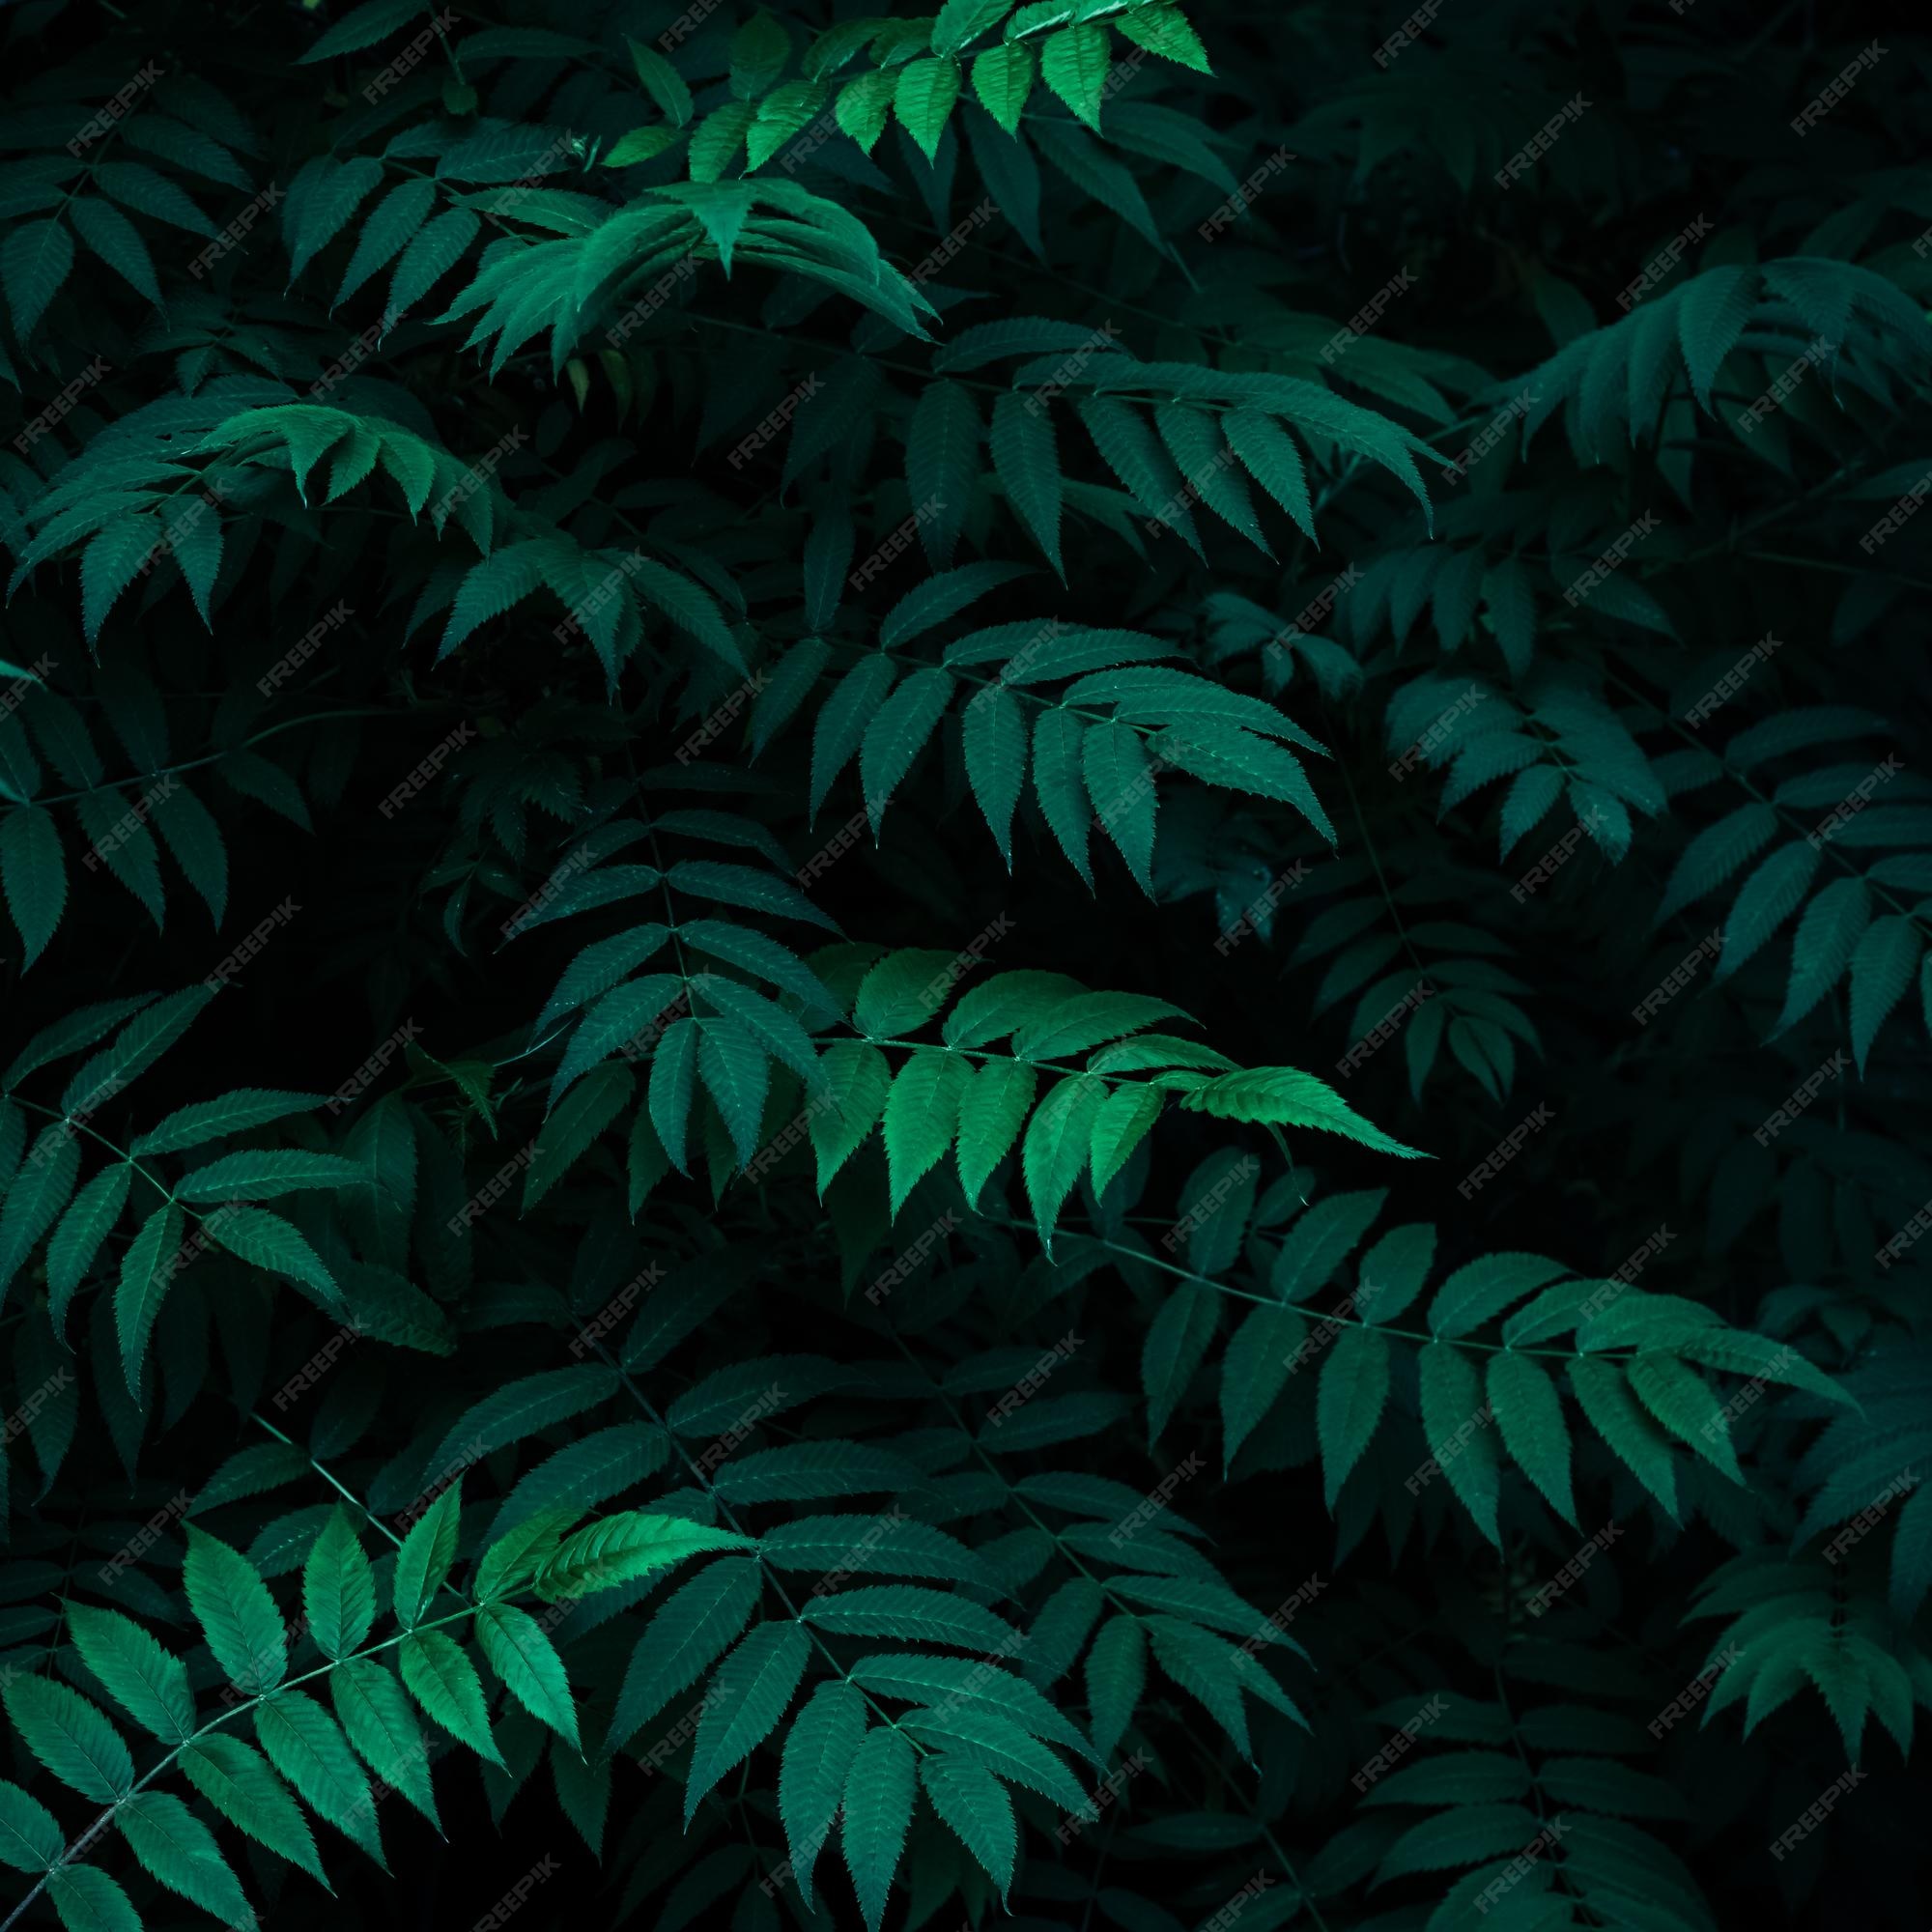 Premium Photo | Green leaves pattern summer natural plant background  wallpaper dark texture of fresh foliage in night greenery backdrop for  design